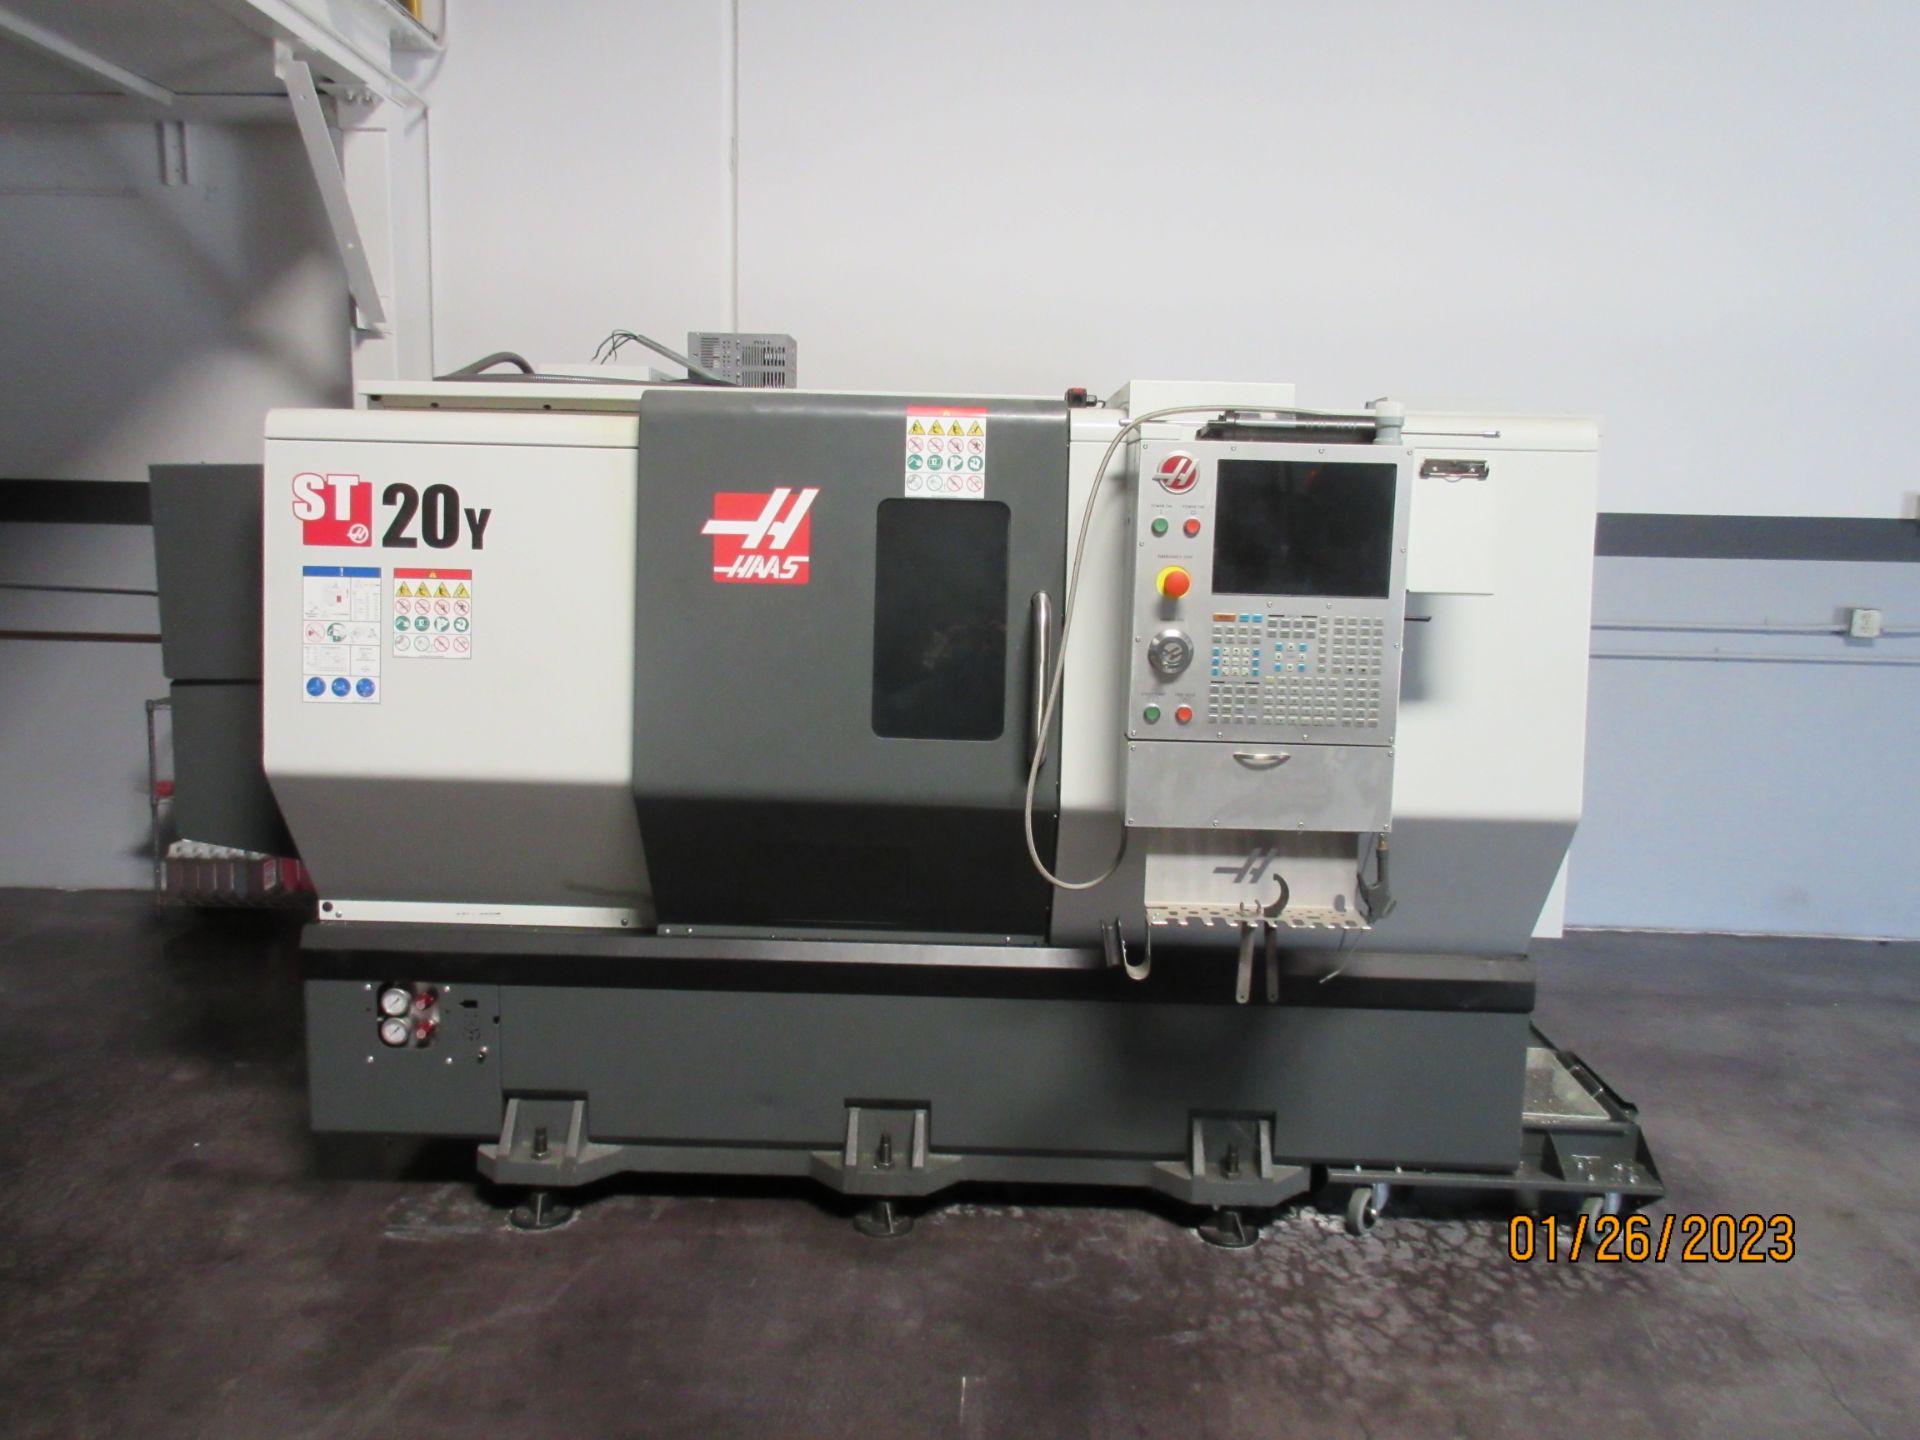 2018 HAAS ST 20Y CNC LATHE, WITH CHIP CONVEYOR, TAPPING COOLANT TANK AND PUMP, SN: 3111882, 220V, - Image 4 of 14